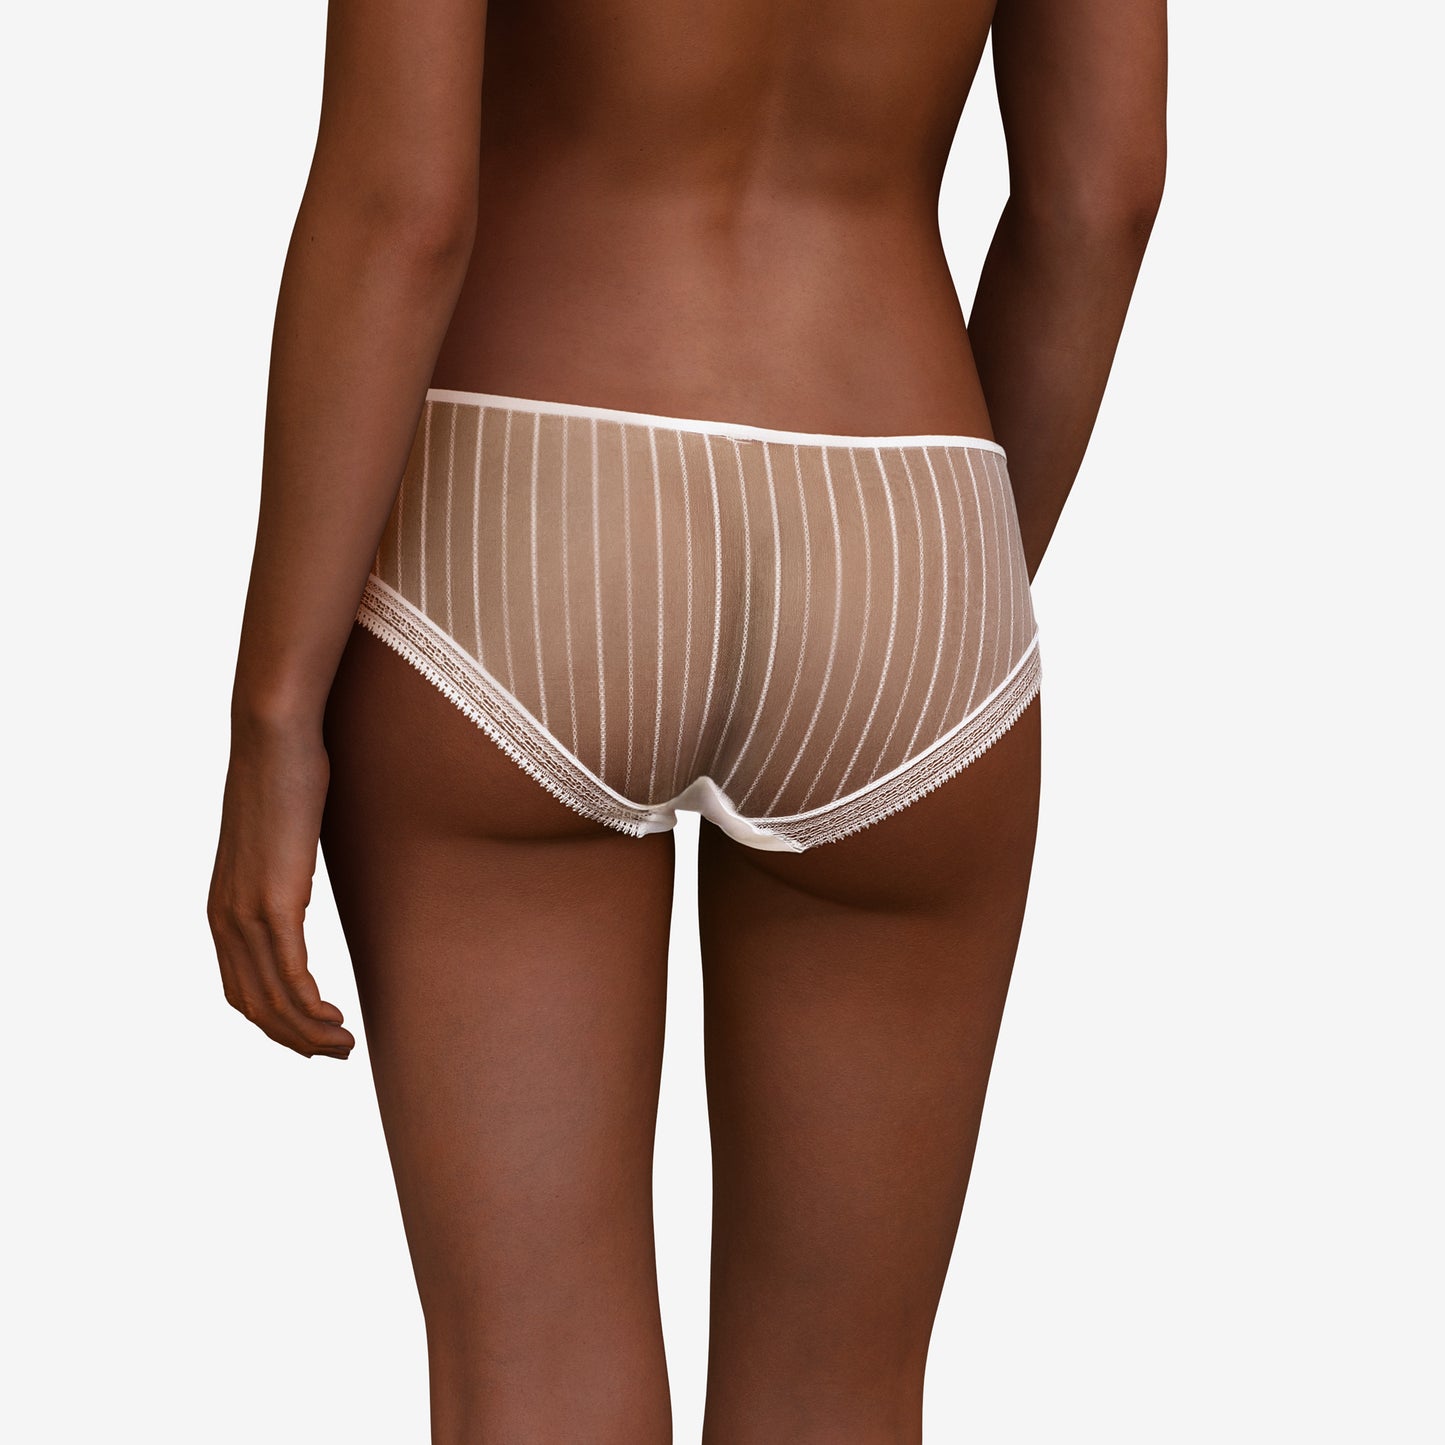 Pretty Things - Passionata Maddie Lace White Short - Underwear Specialists 